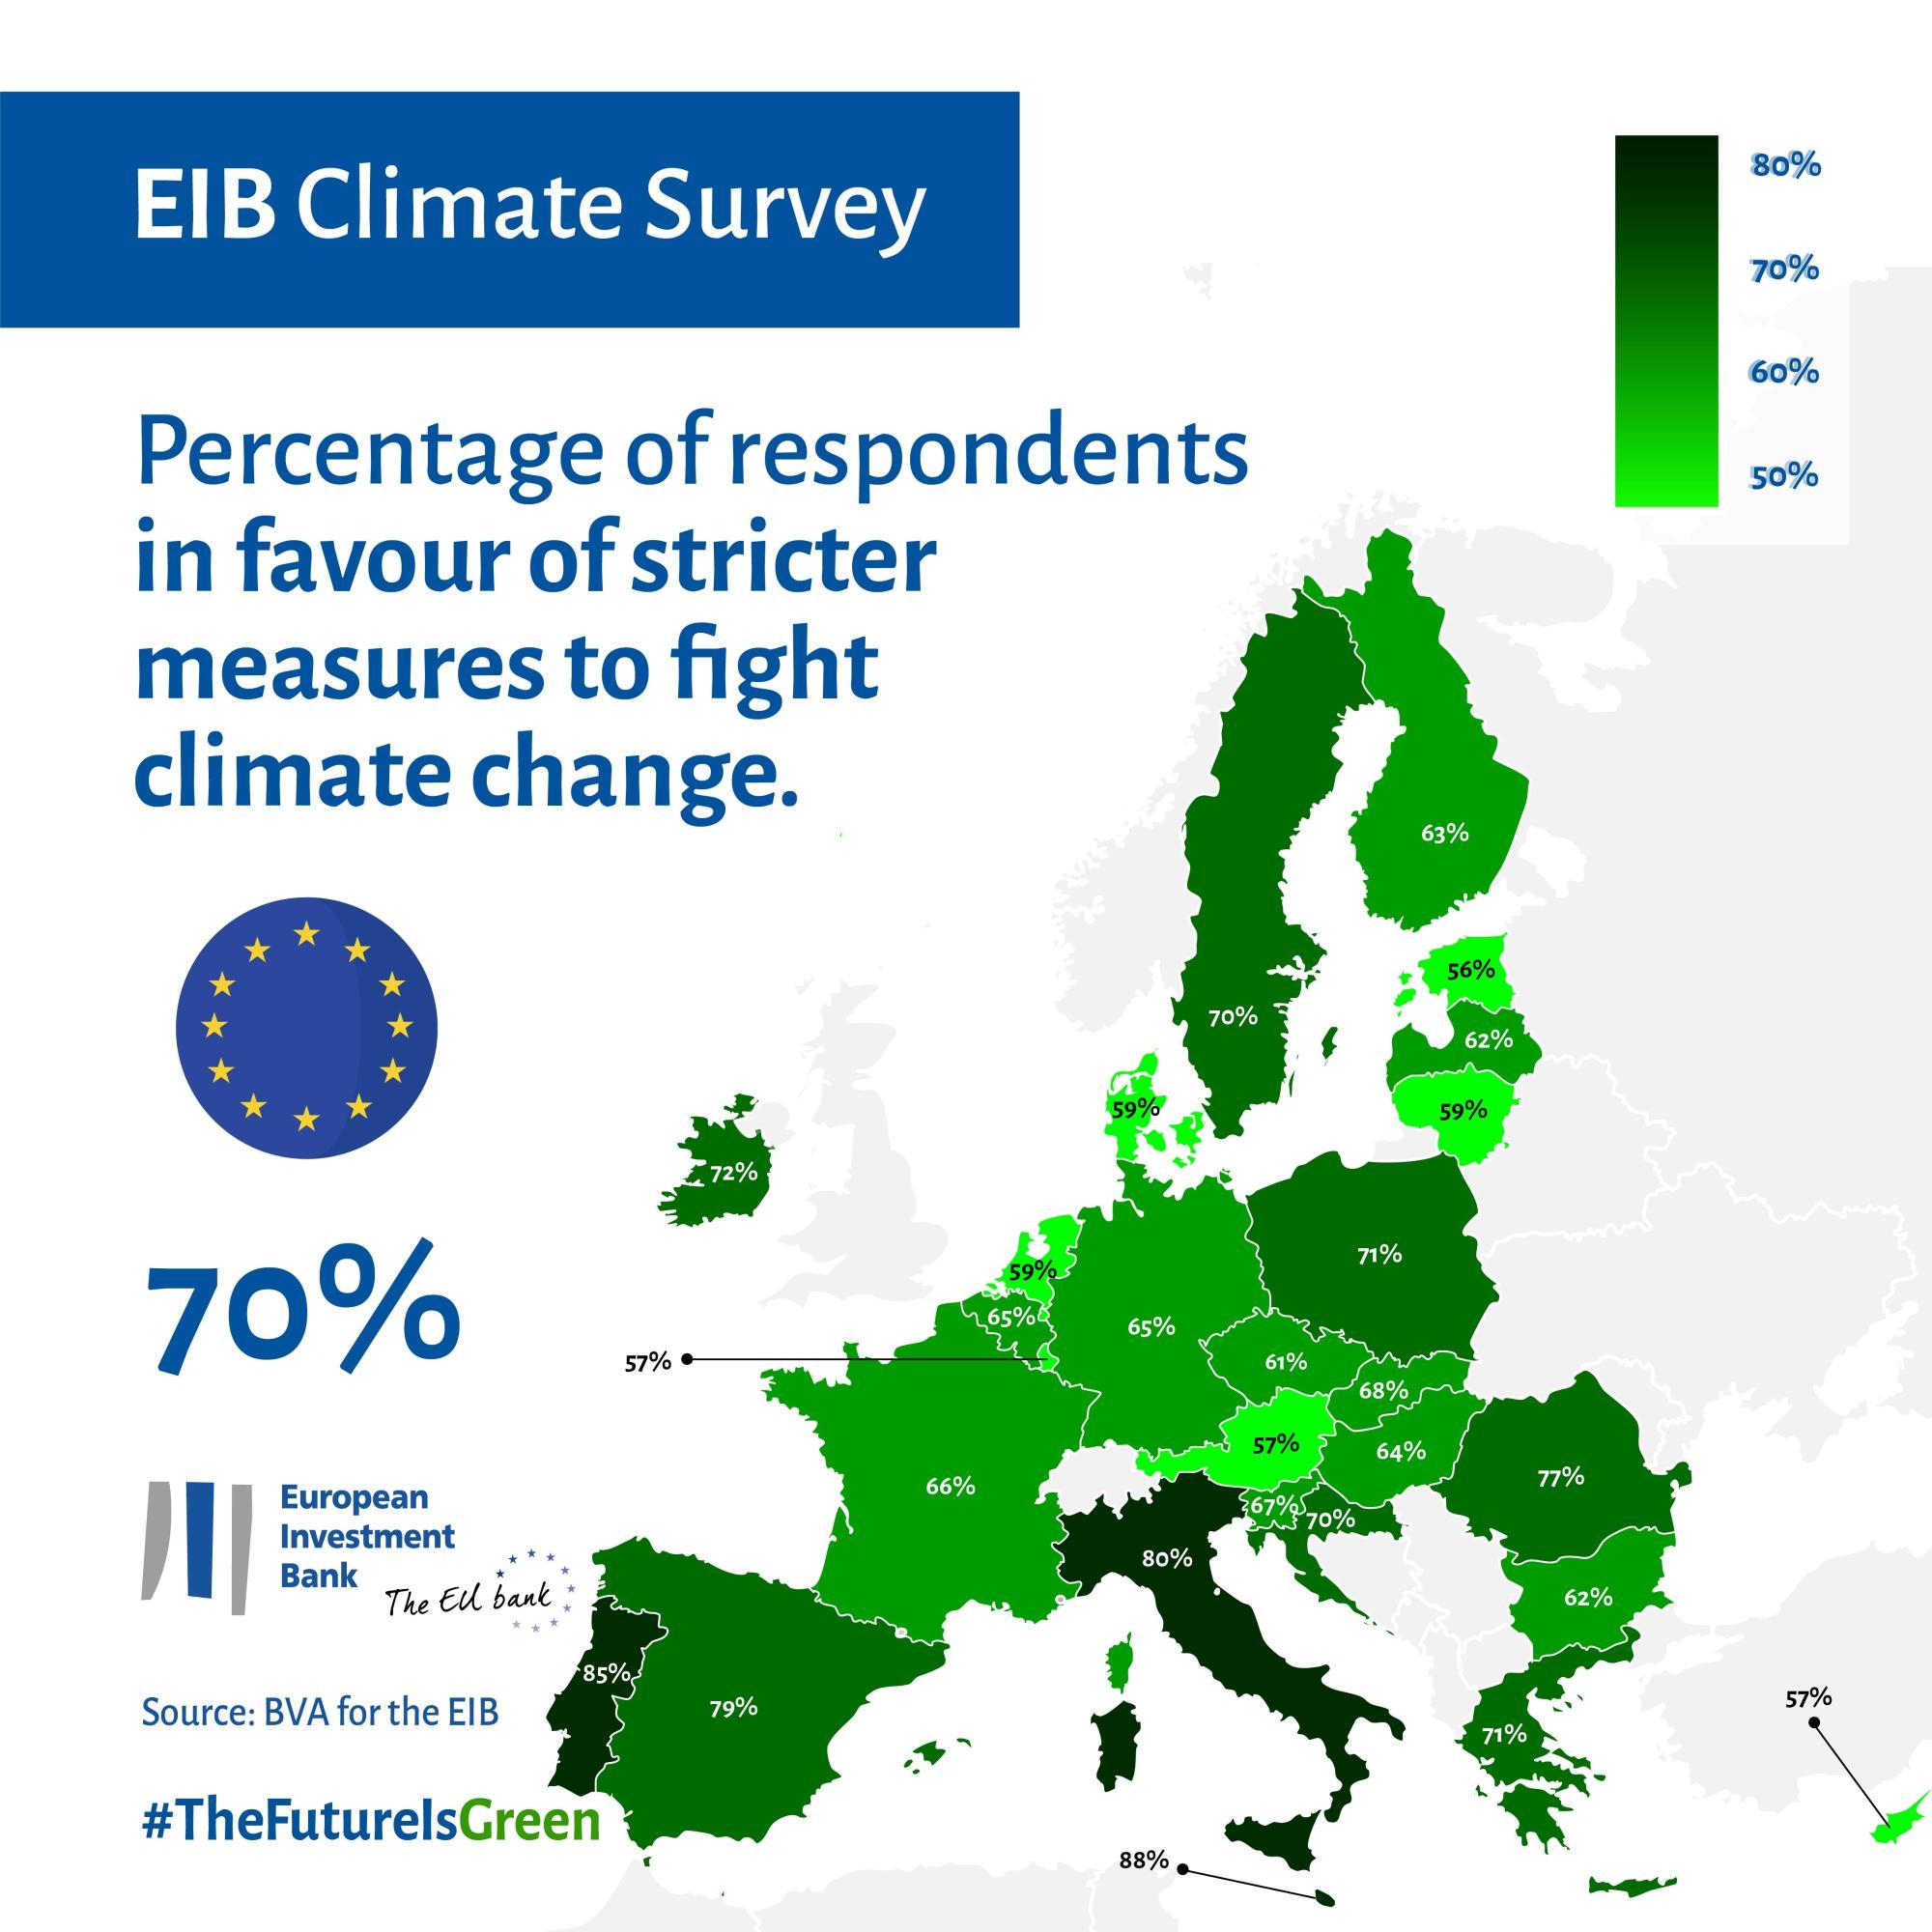 Percentage of respondents in favour of stricter measures to fight climate change – 70% EU average